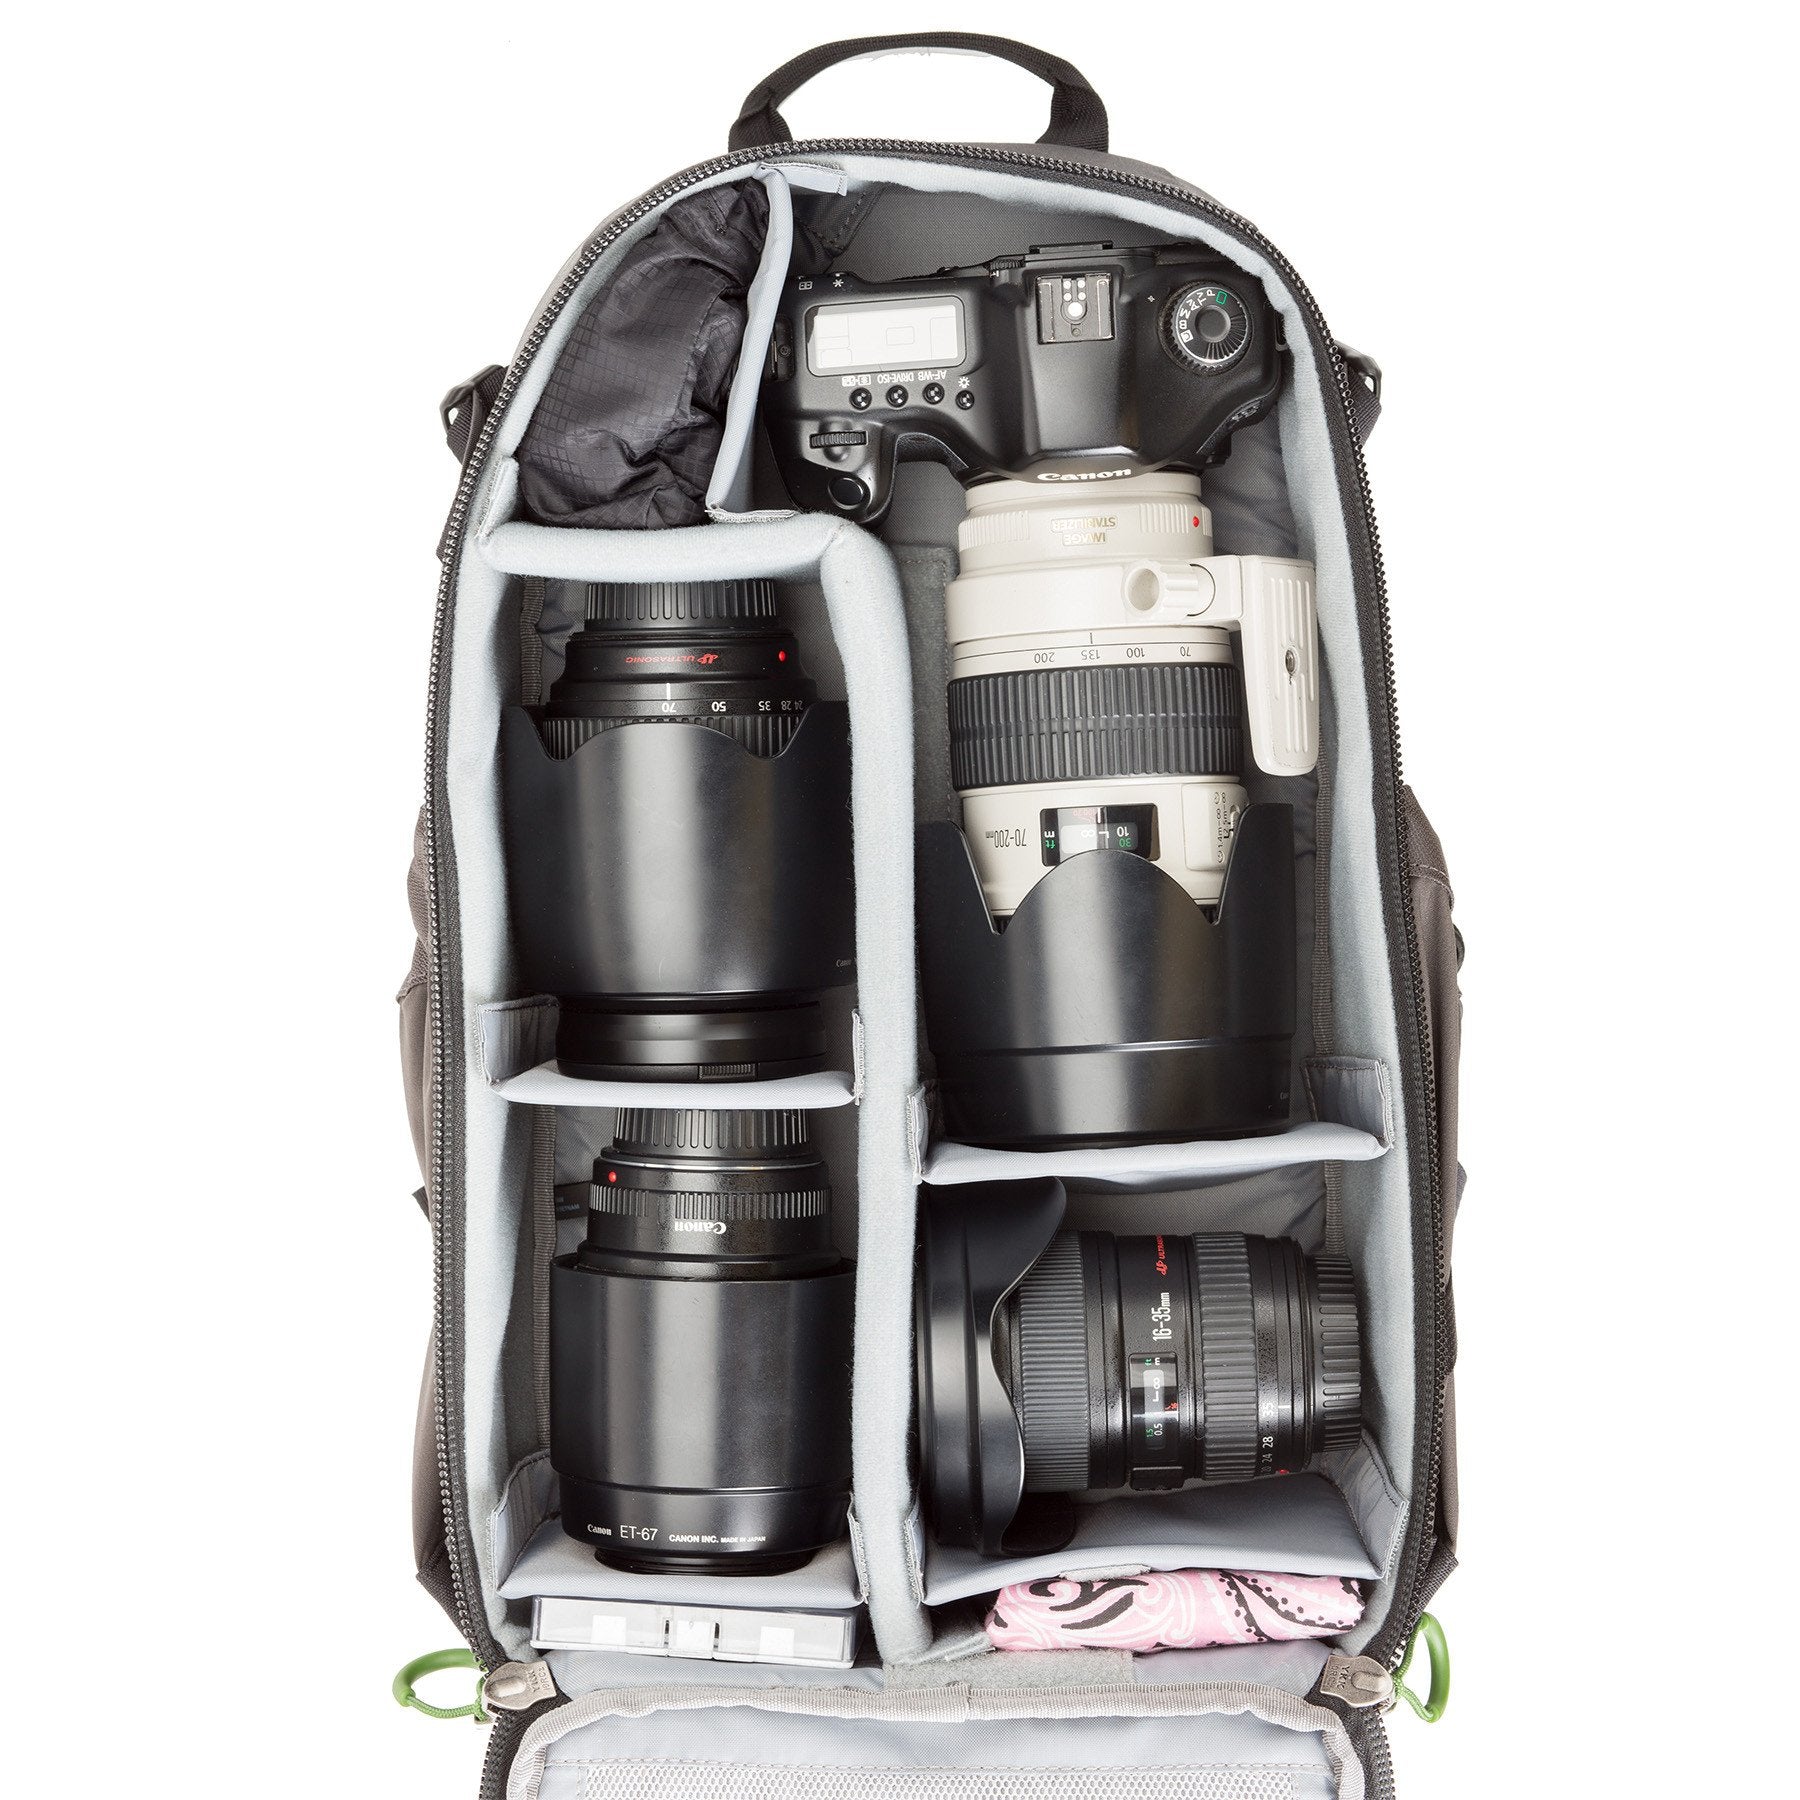 TrailScape High Backpack Tank Outdoor – Think but Photo Photography Capacity Compact 18L